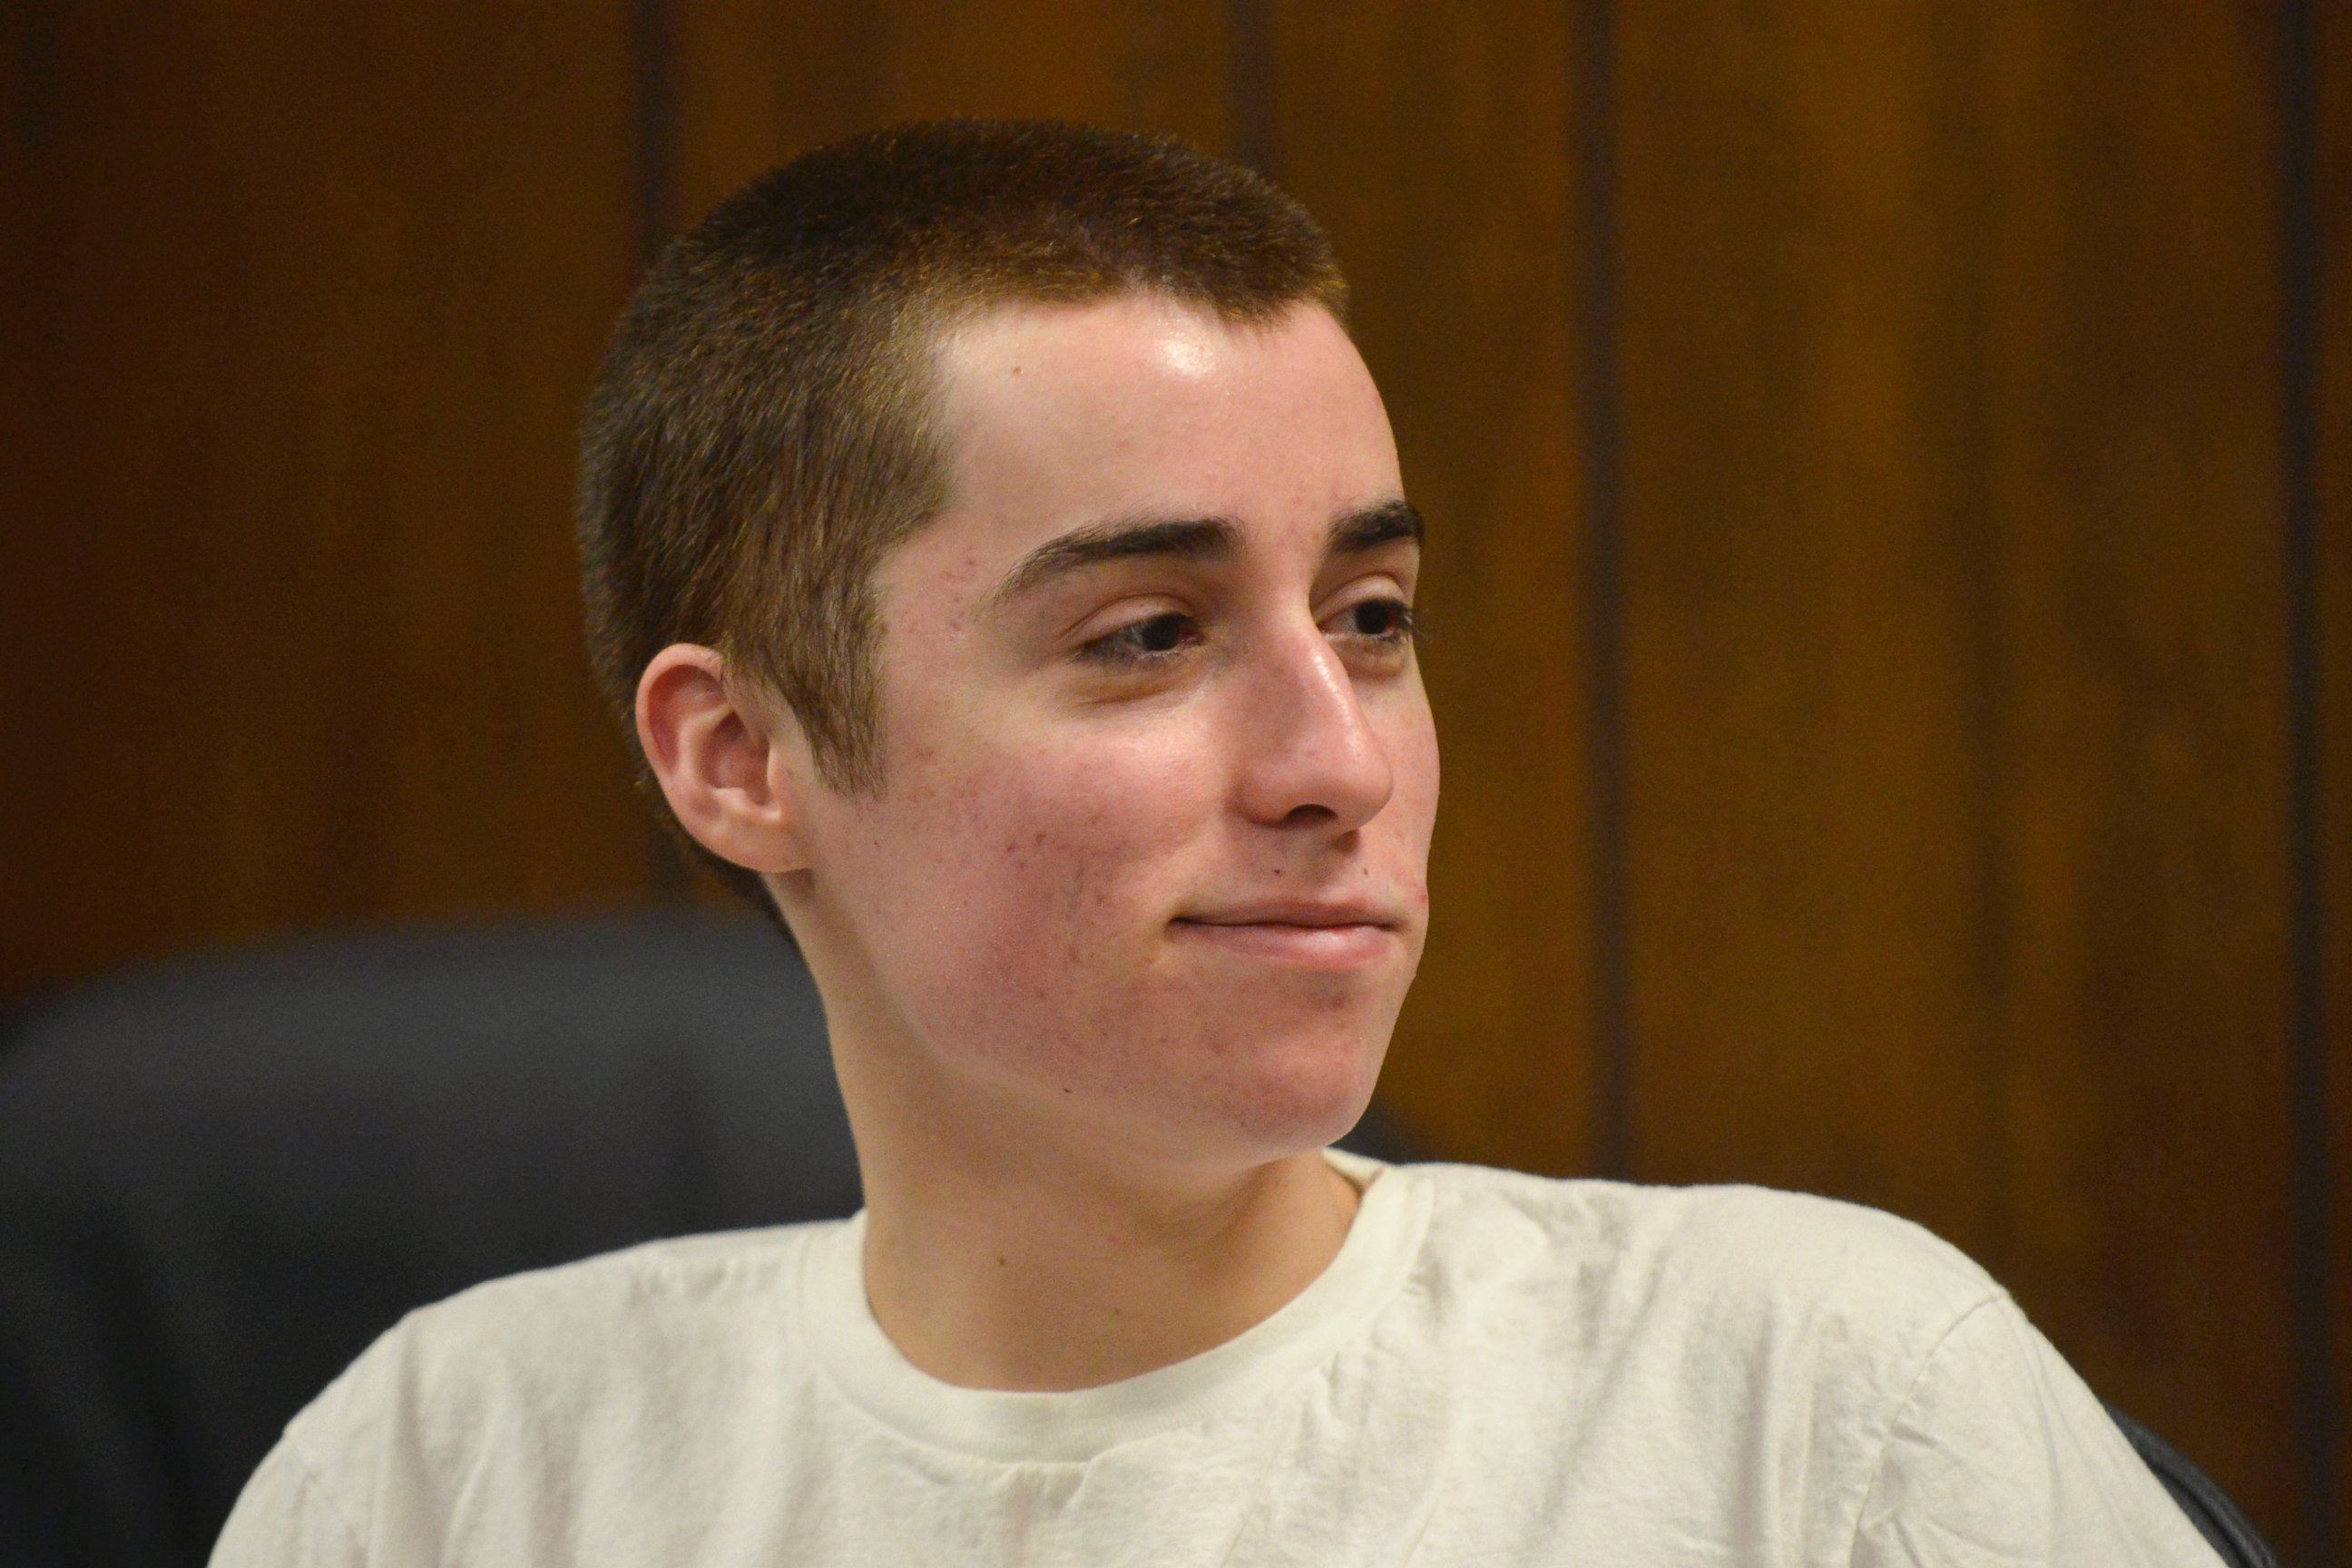 PHOTO: T.J. Lane smirks as he listens to the judge during his sentencing in Chardon, Ohio, March 19, 2013.